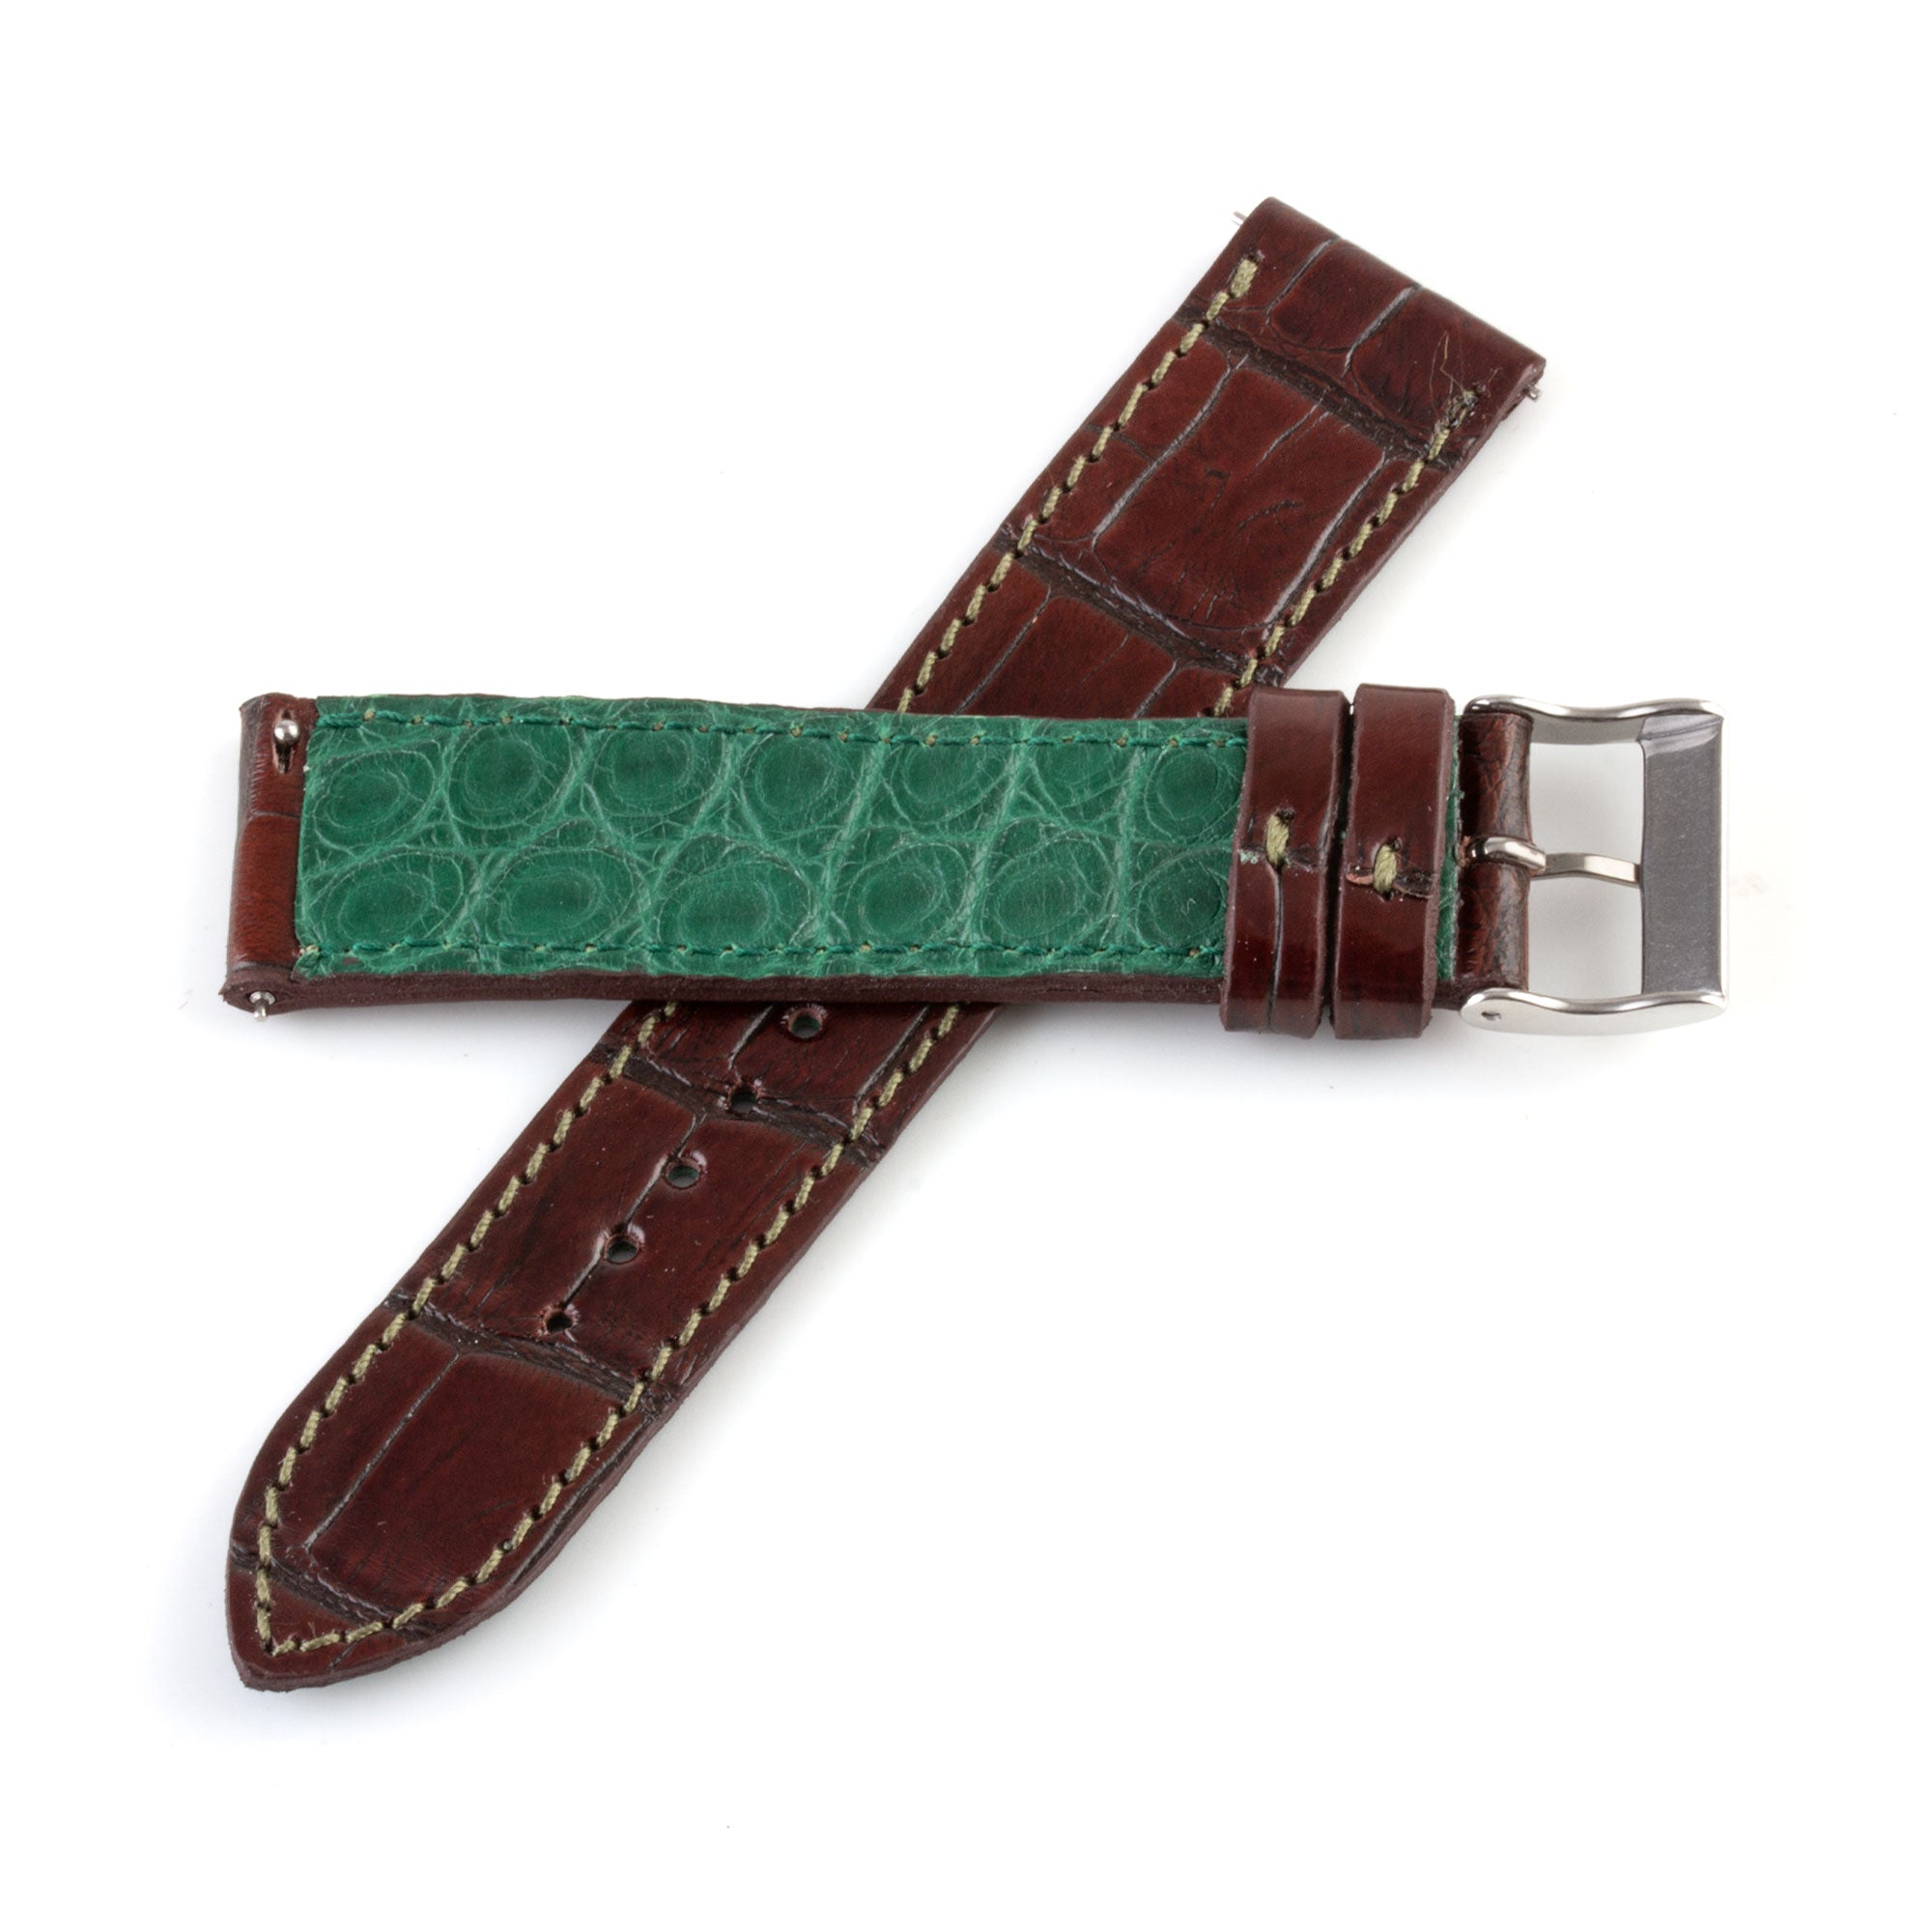 Alligator "Solo" leather watch band - 20mm width (0.79 inches) / Size M (n° 4)